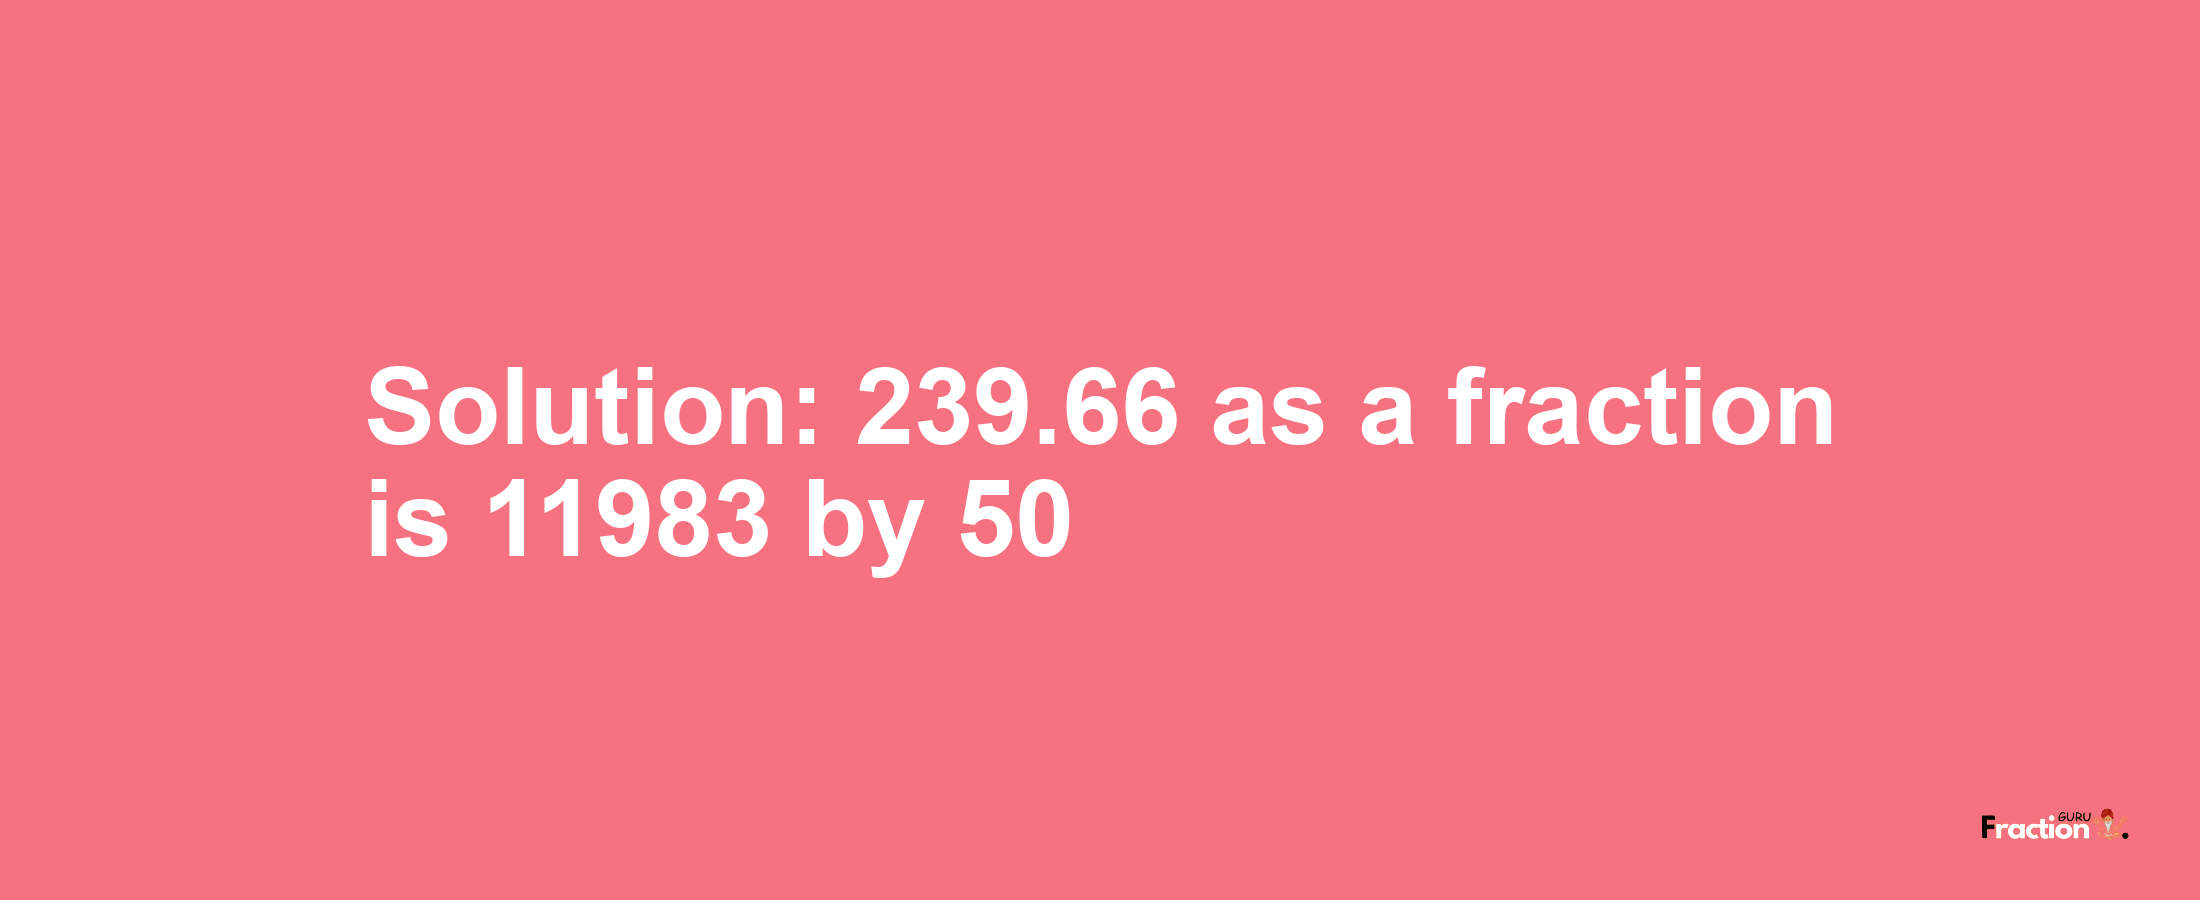 Solution:239.66 as a fraction is 11983/50